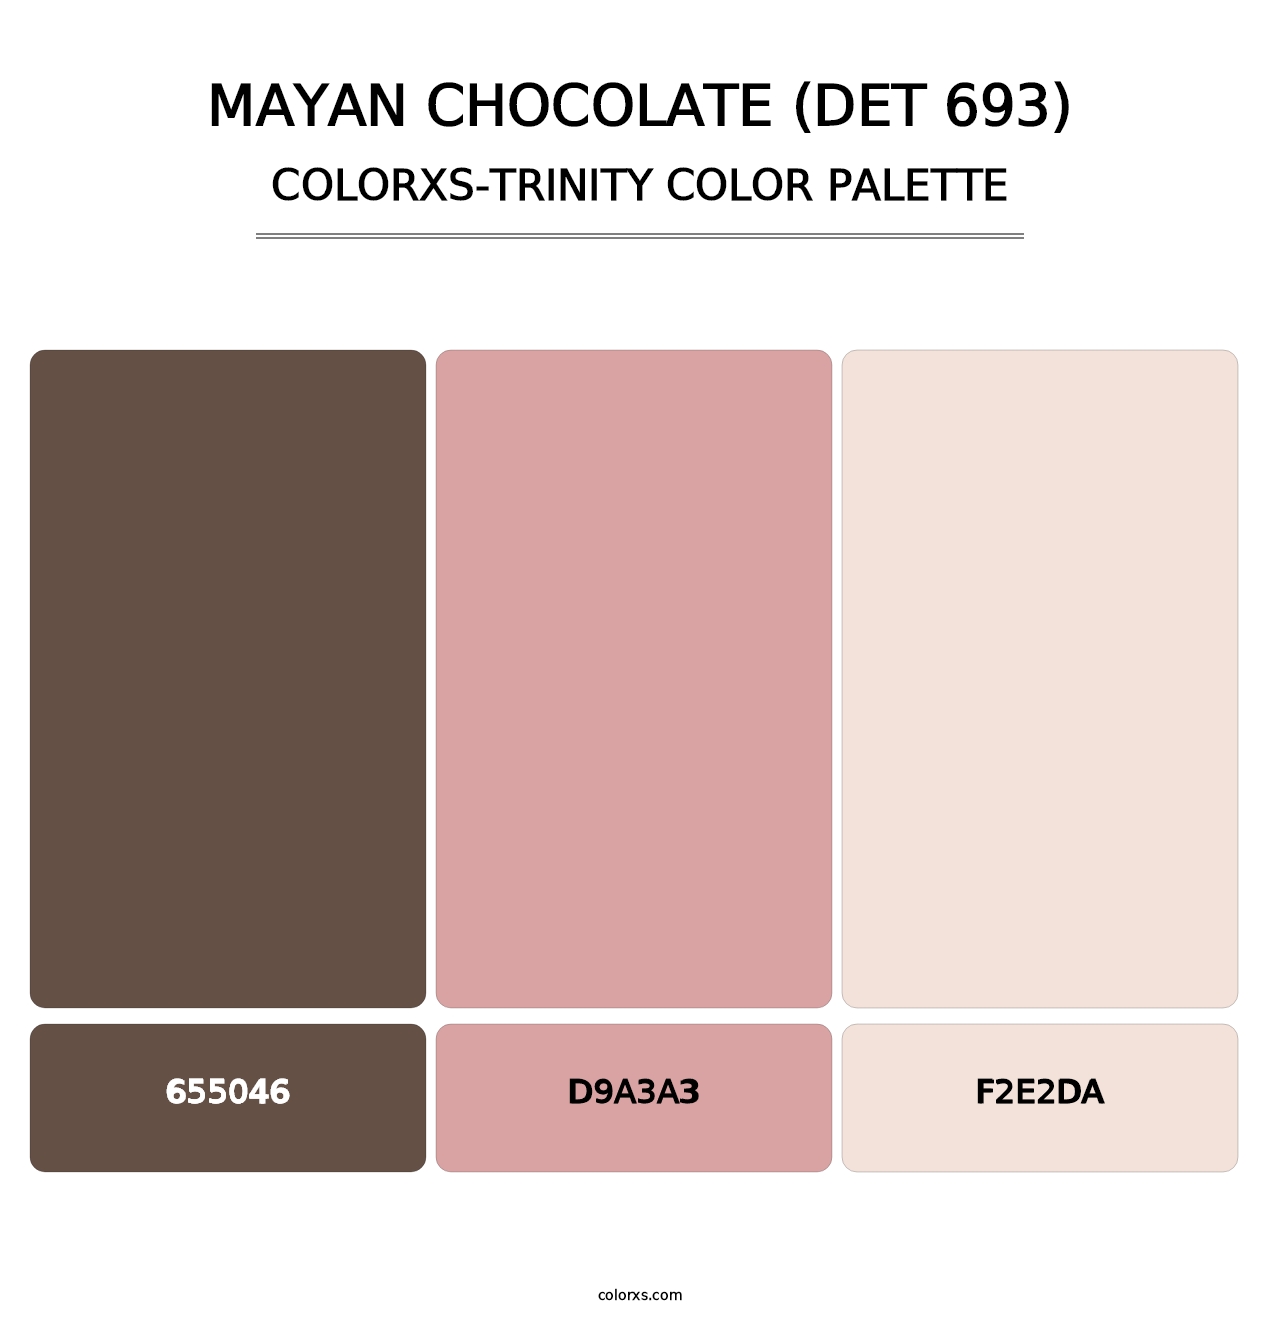 Mayan Chocolate (DET 693) - Colorxs Trinity Palette